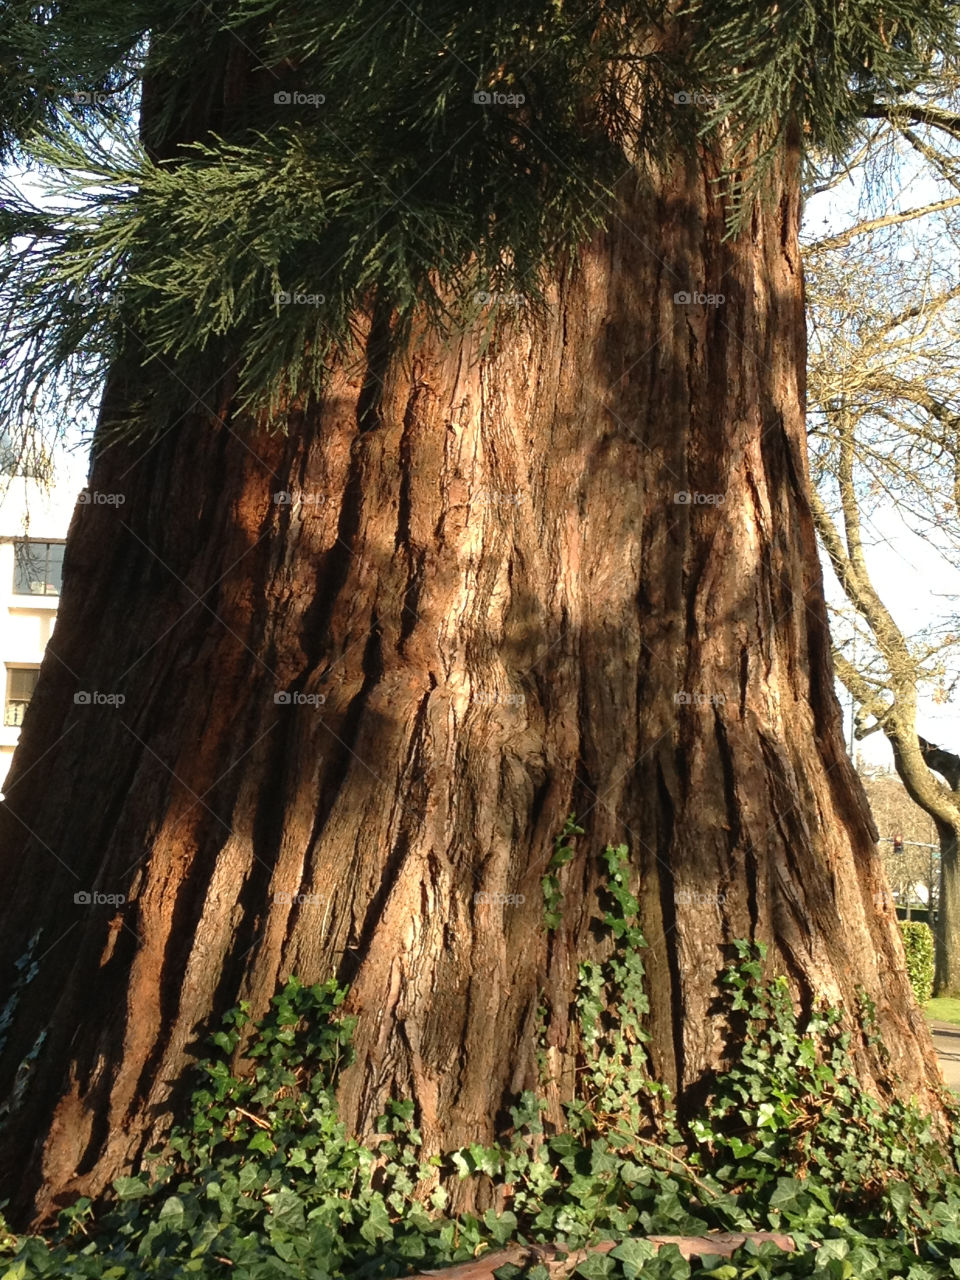 The oldest and tallest redwood at the Capitol